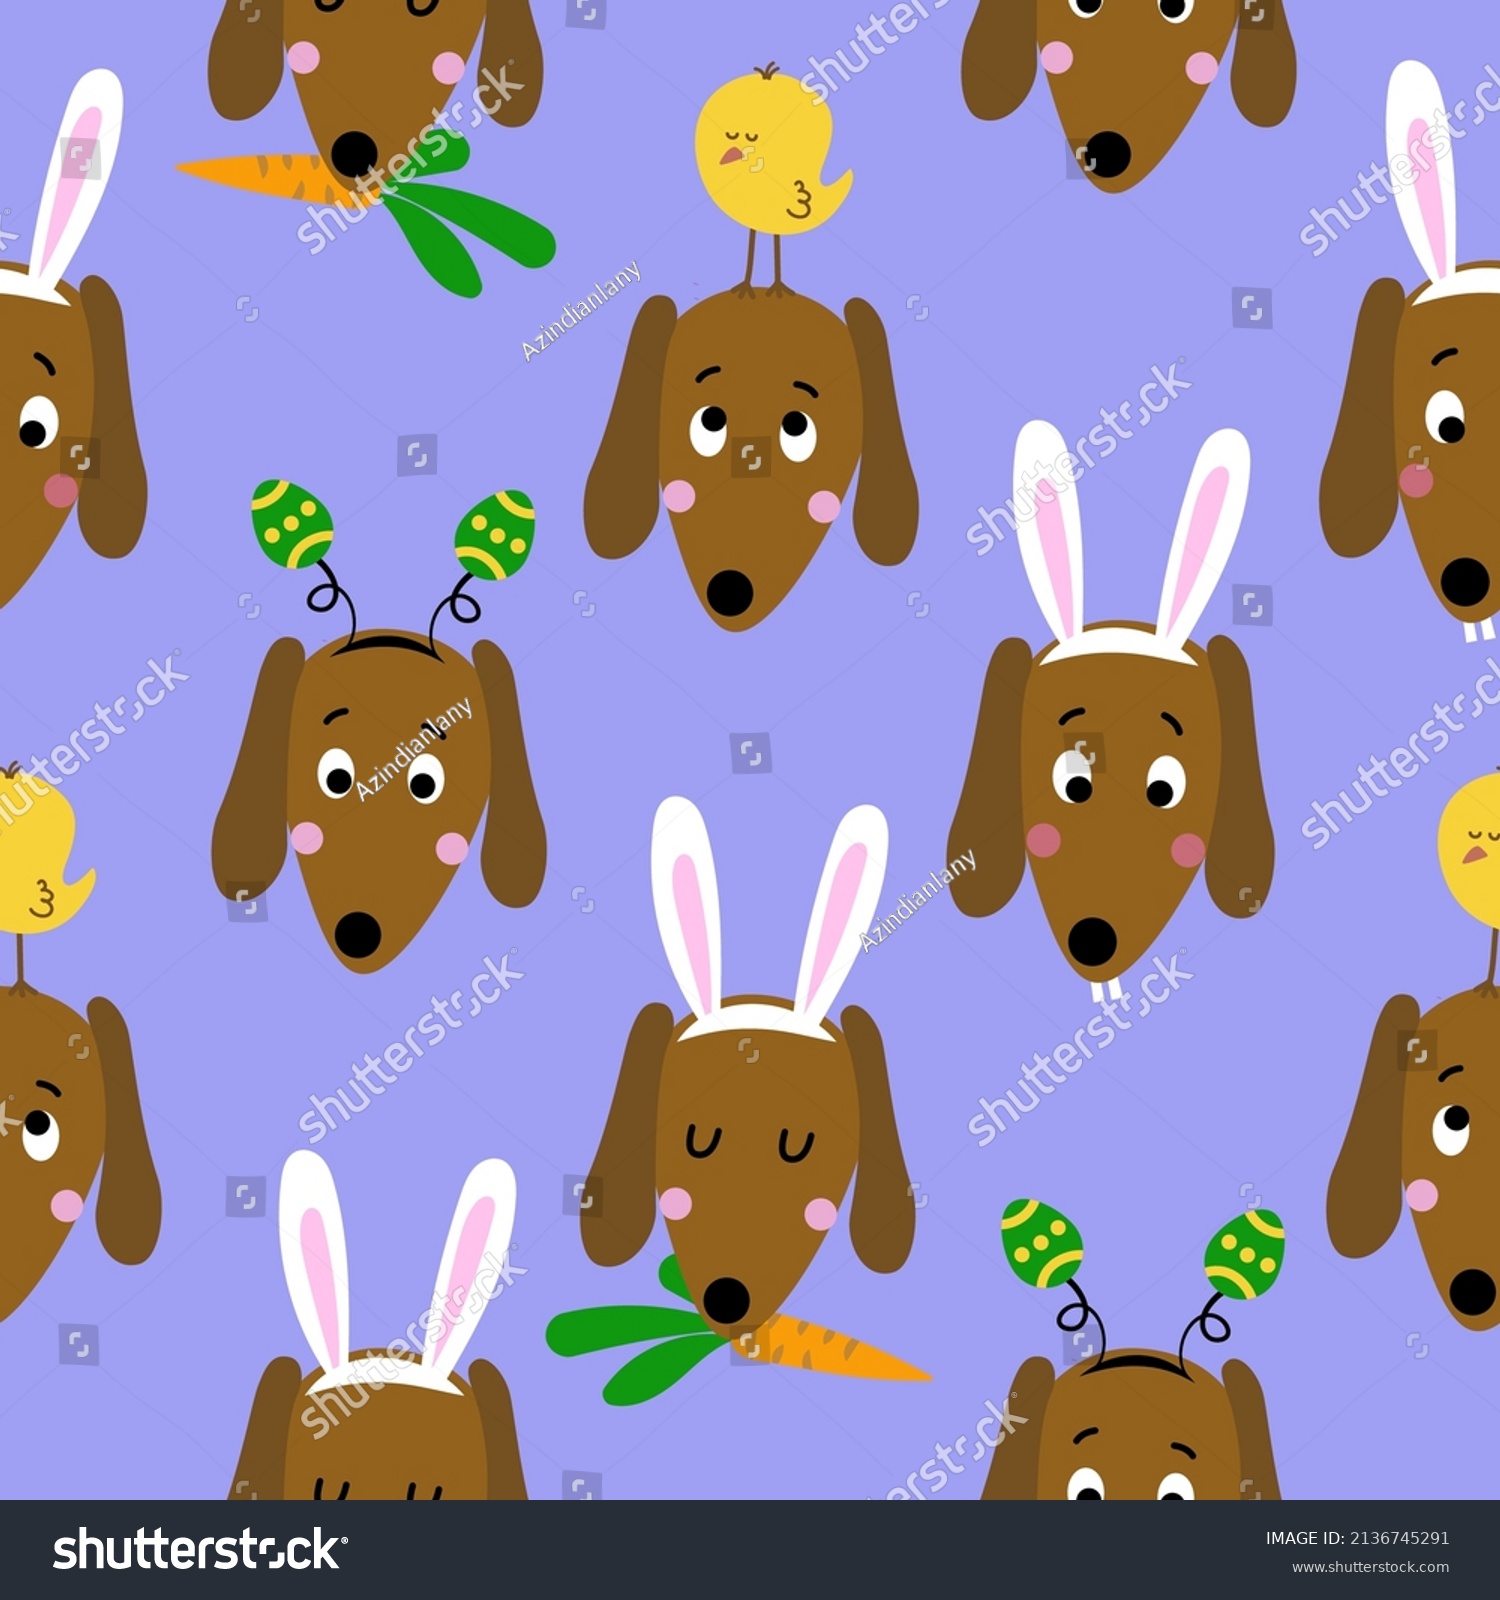 SVG of Dachshund Easter egg hunt party - Funny cartoon weiner dogs and eggs. Cute cactus, characters. Hand drawn doodle set for kids. For textiles, nursery, wallpapers, wrapping paper, clothes. svg